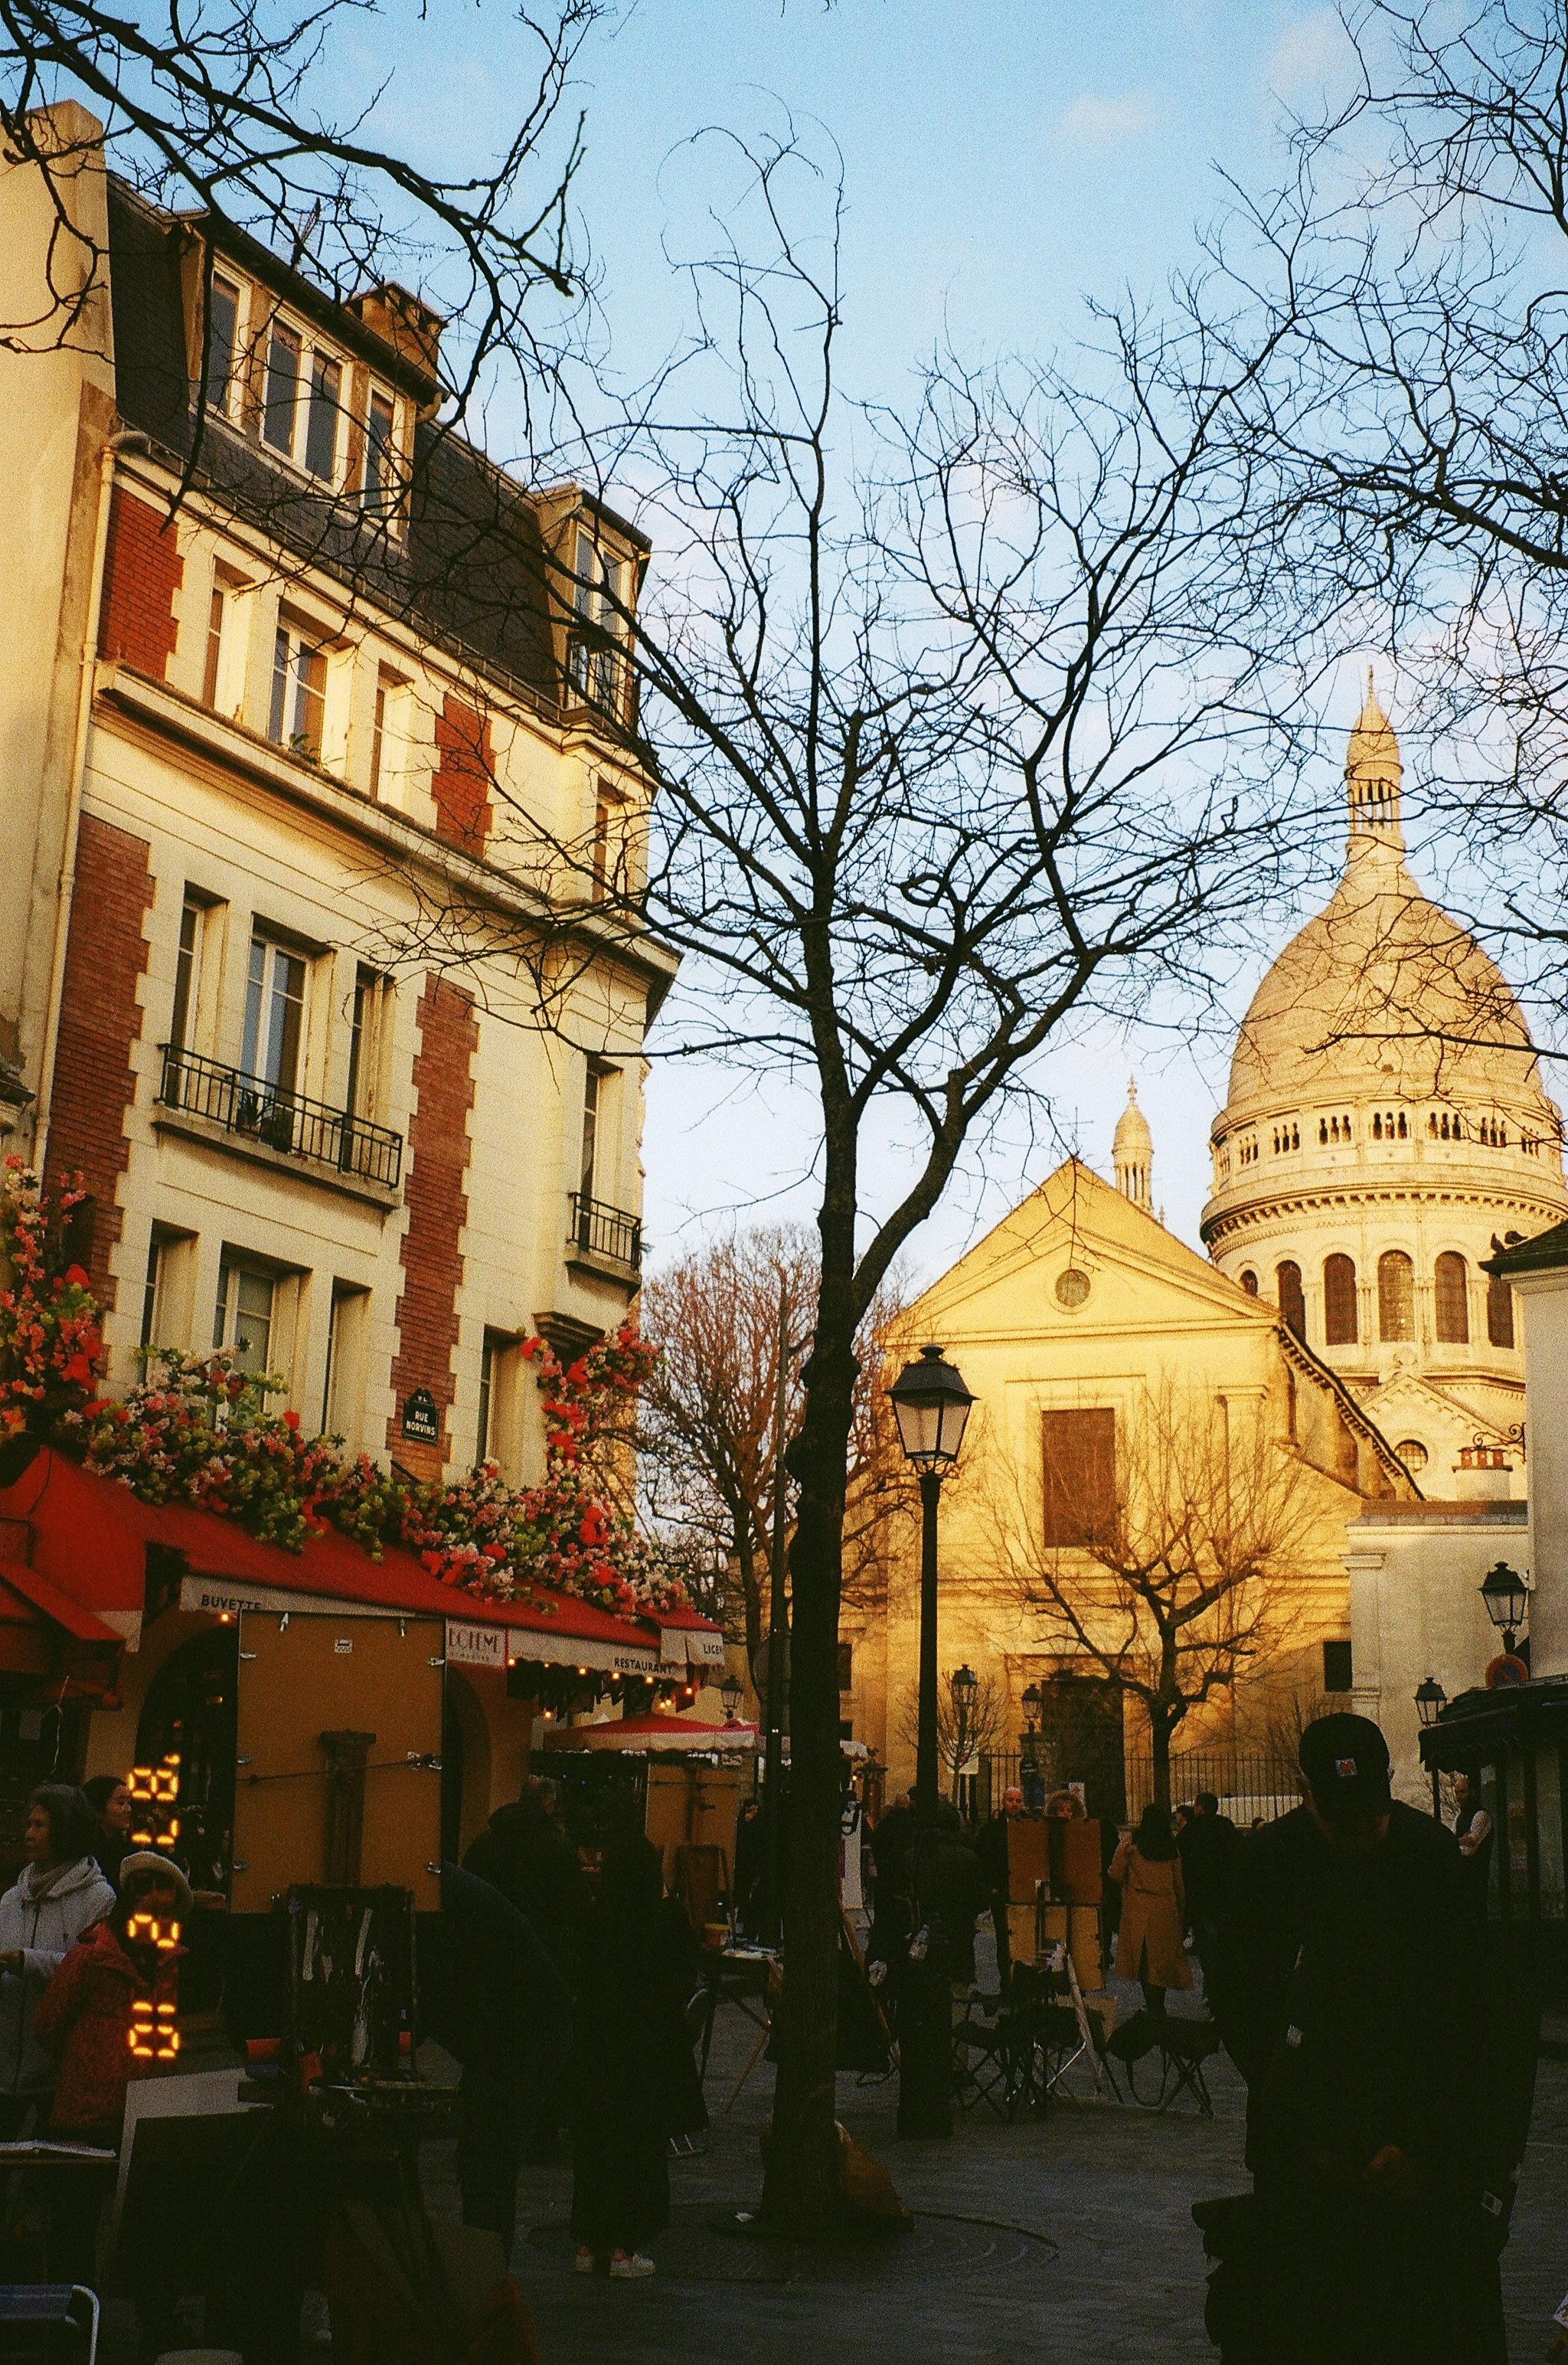 This image is from Montmarte Paris, looking up at the beautiful cathedral SacreCoeur. The sun is setting, so the golden yellow light is hitting so nicely on the beautiful white facade of the cathedral and the stone domes.